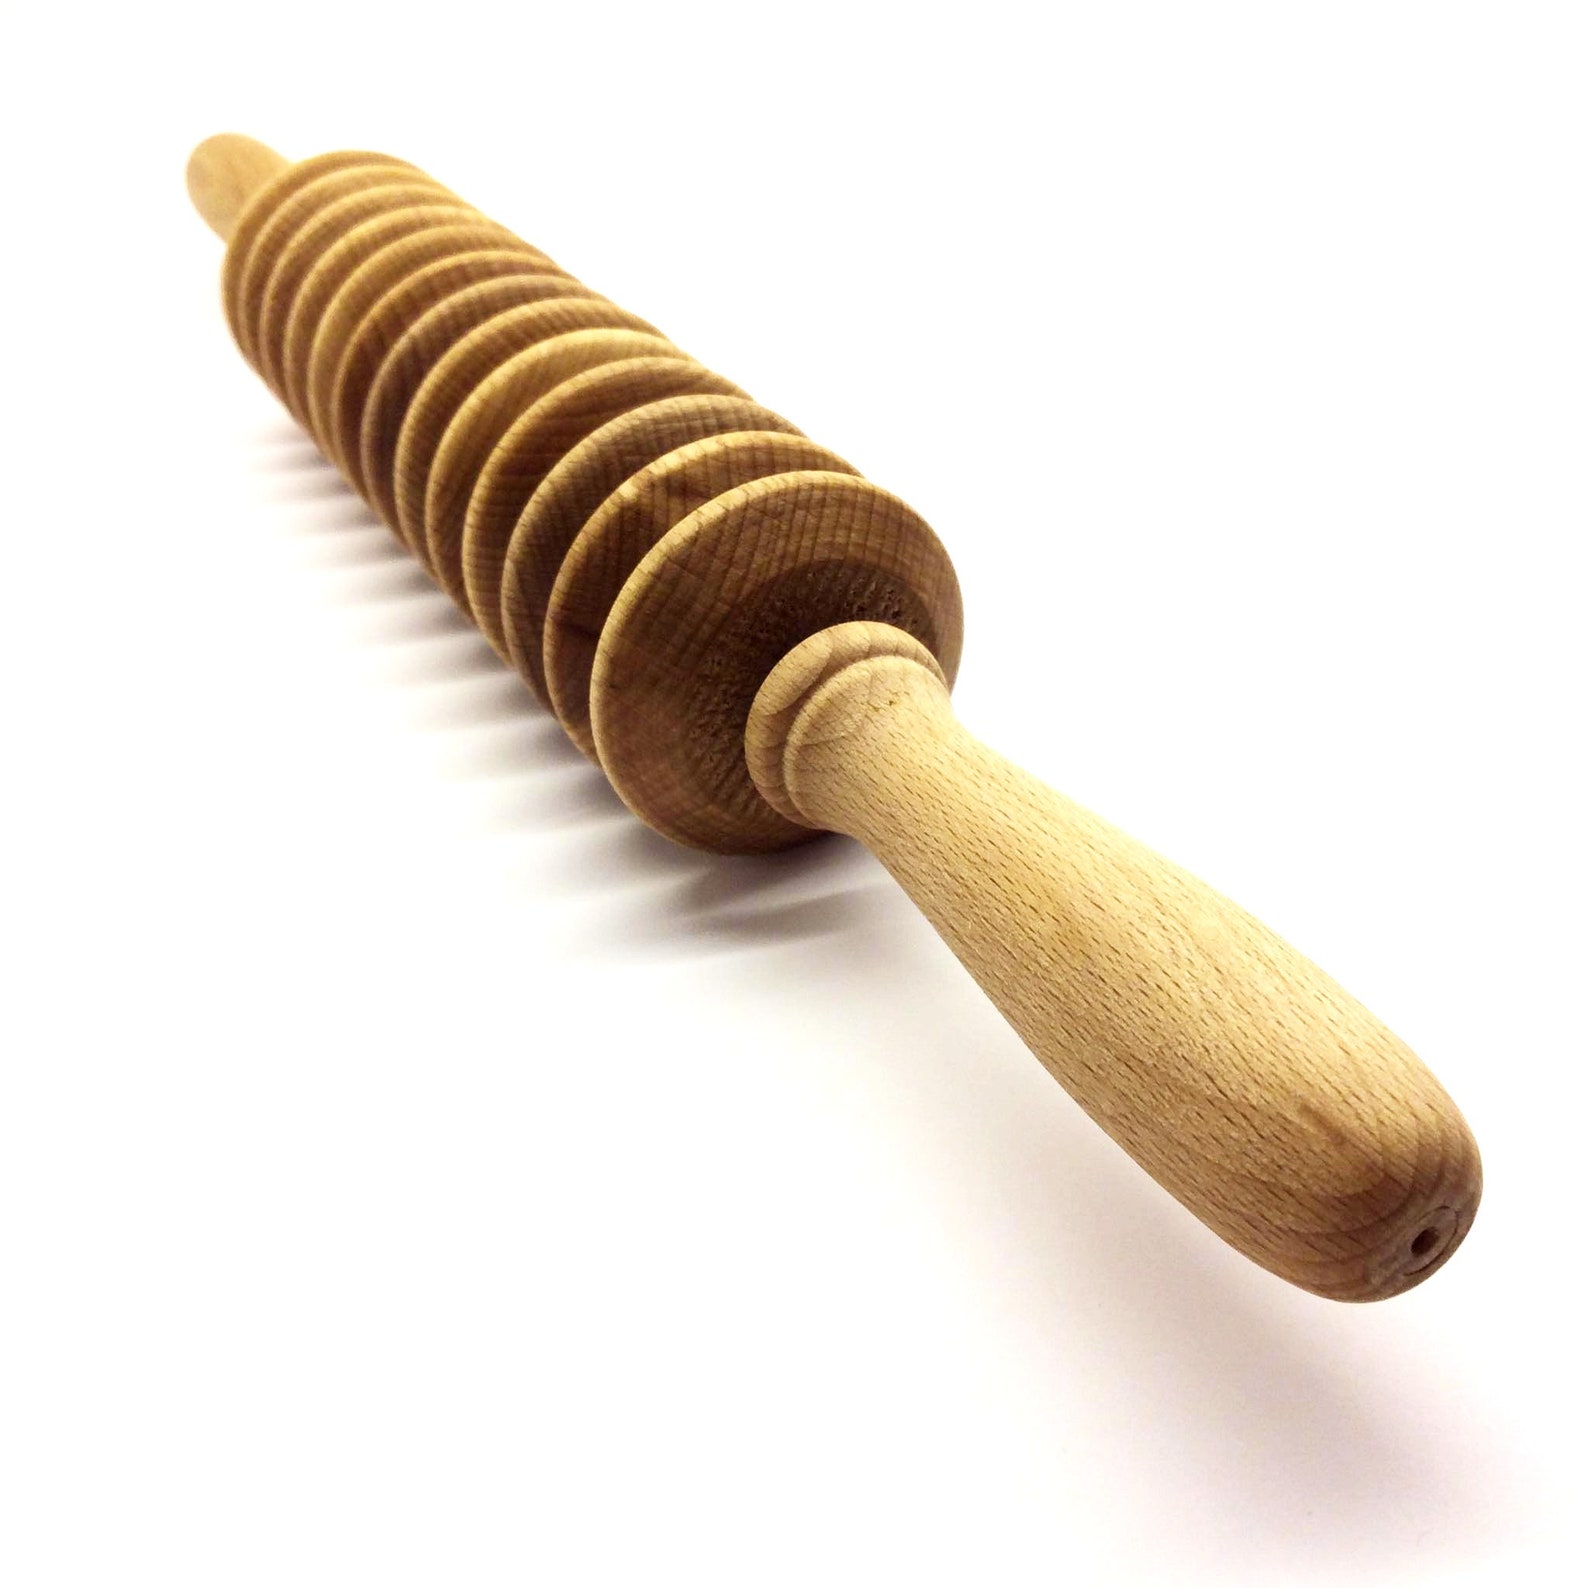 Wooden Massage Roller Wood Therapy Tools Maderotherapy Etsy